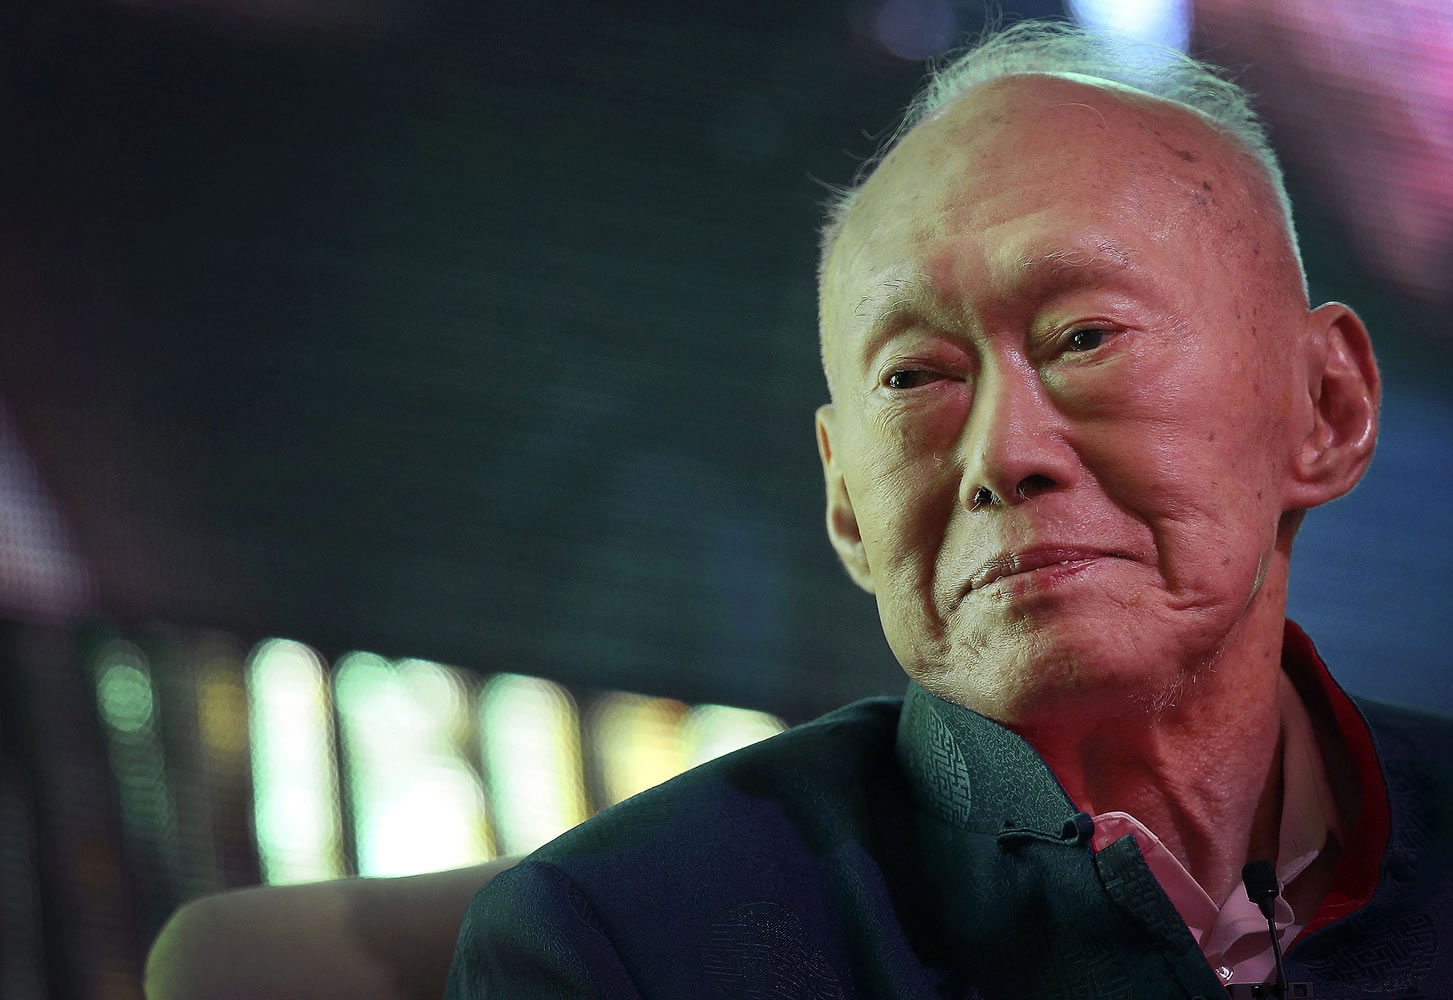 Lee Kuan Yew
Singapore's first prime minister